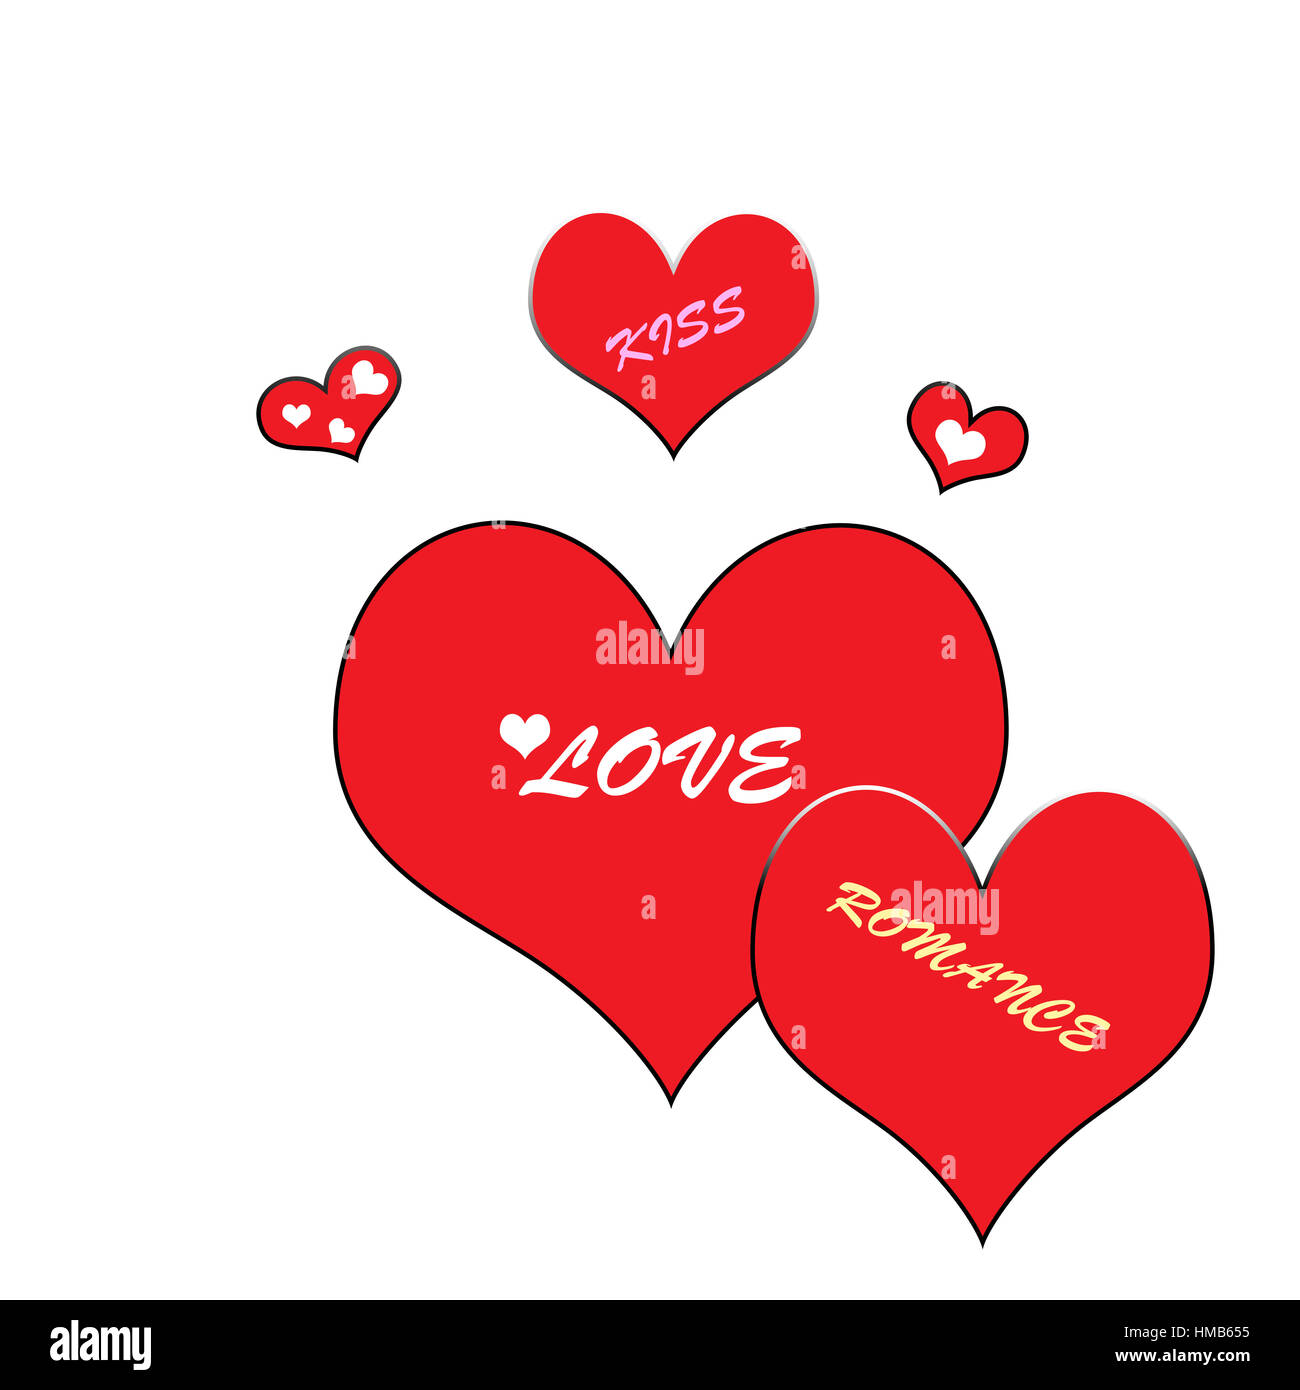 Illustration of Valentine hearts featuring love, romance, and kiss. Cutout. Stock Photo